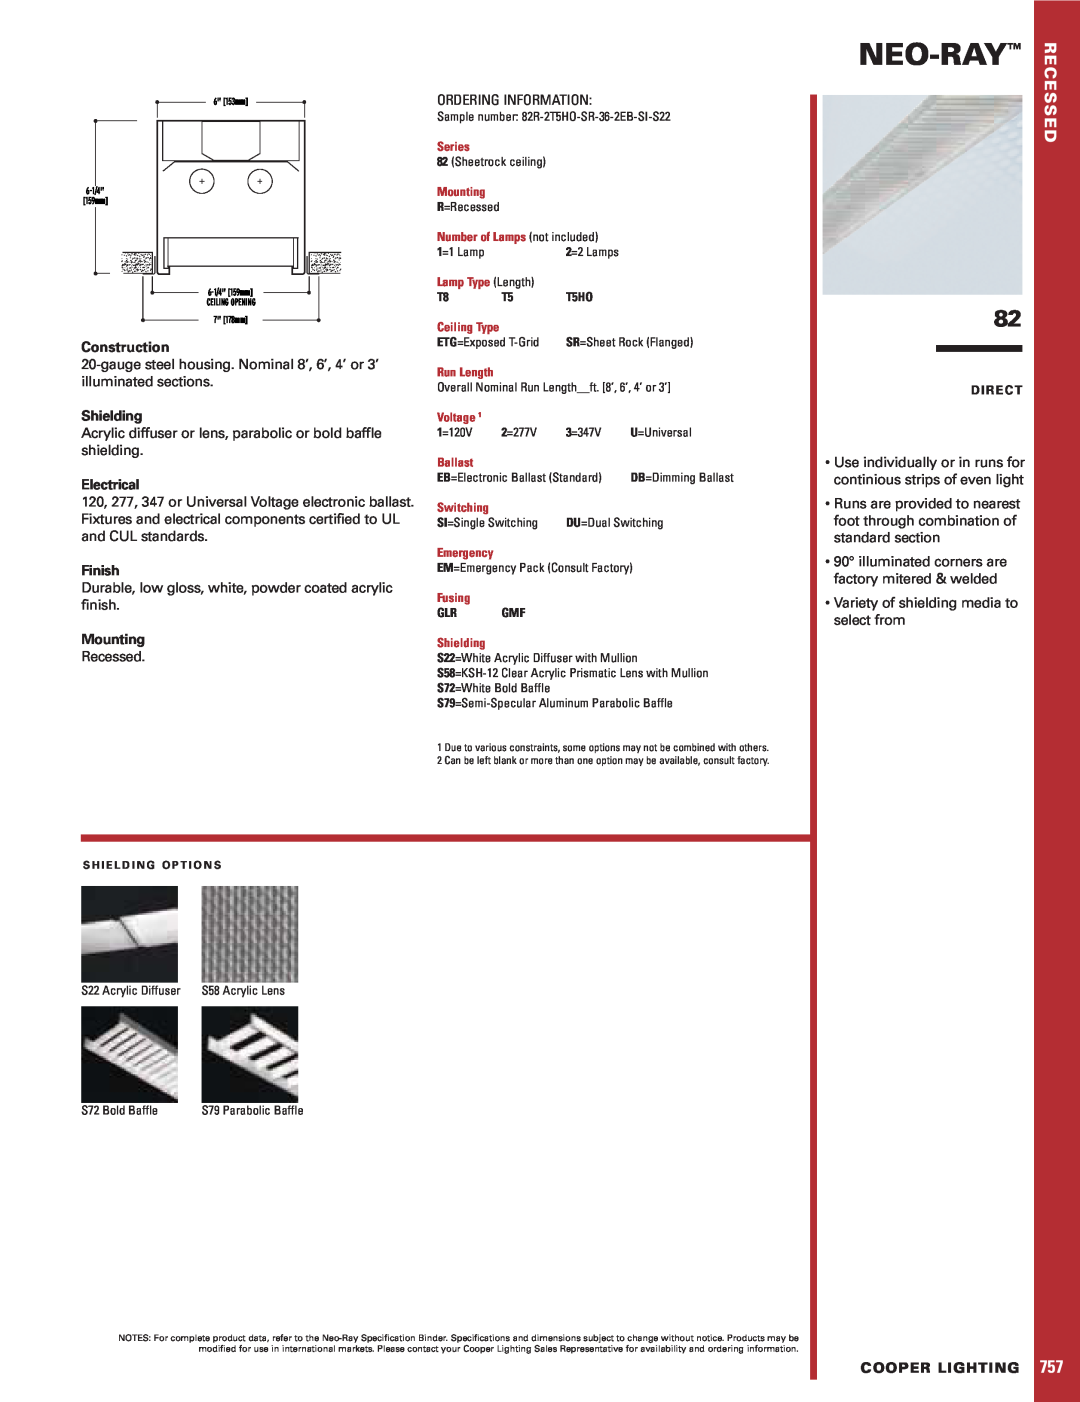 Cooper Lighting 82 specifications Neo-Ray, Construction, Shielding, Electrical, Finish, Mounting, Cooper Lighting 